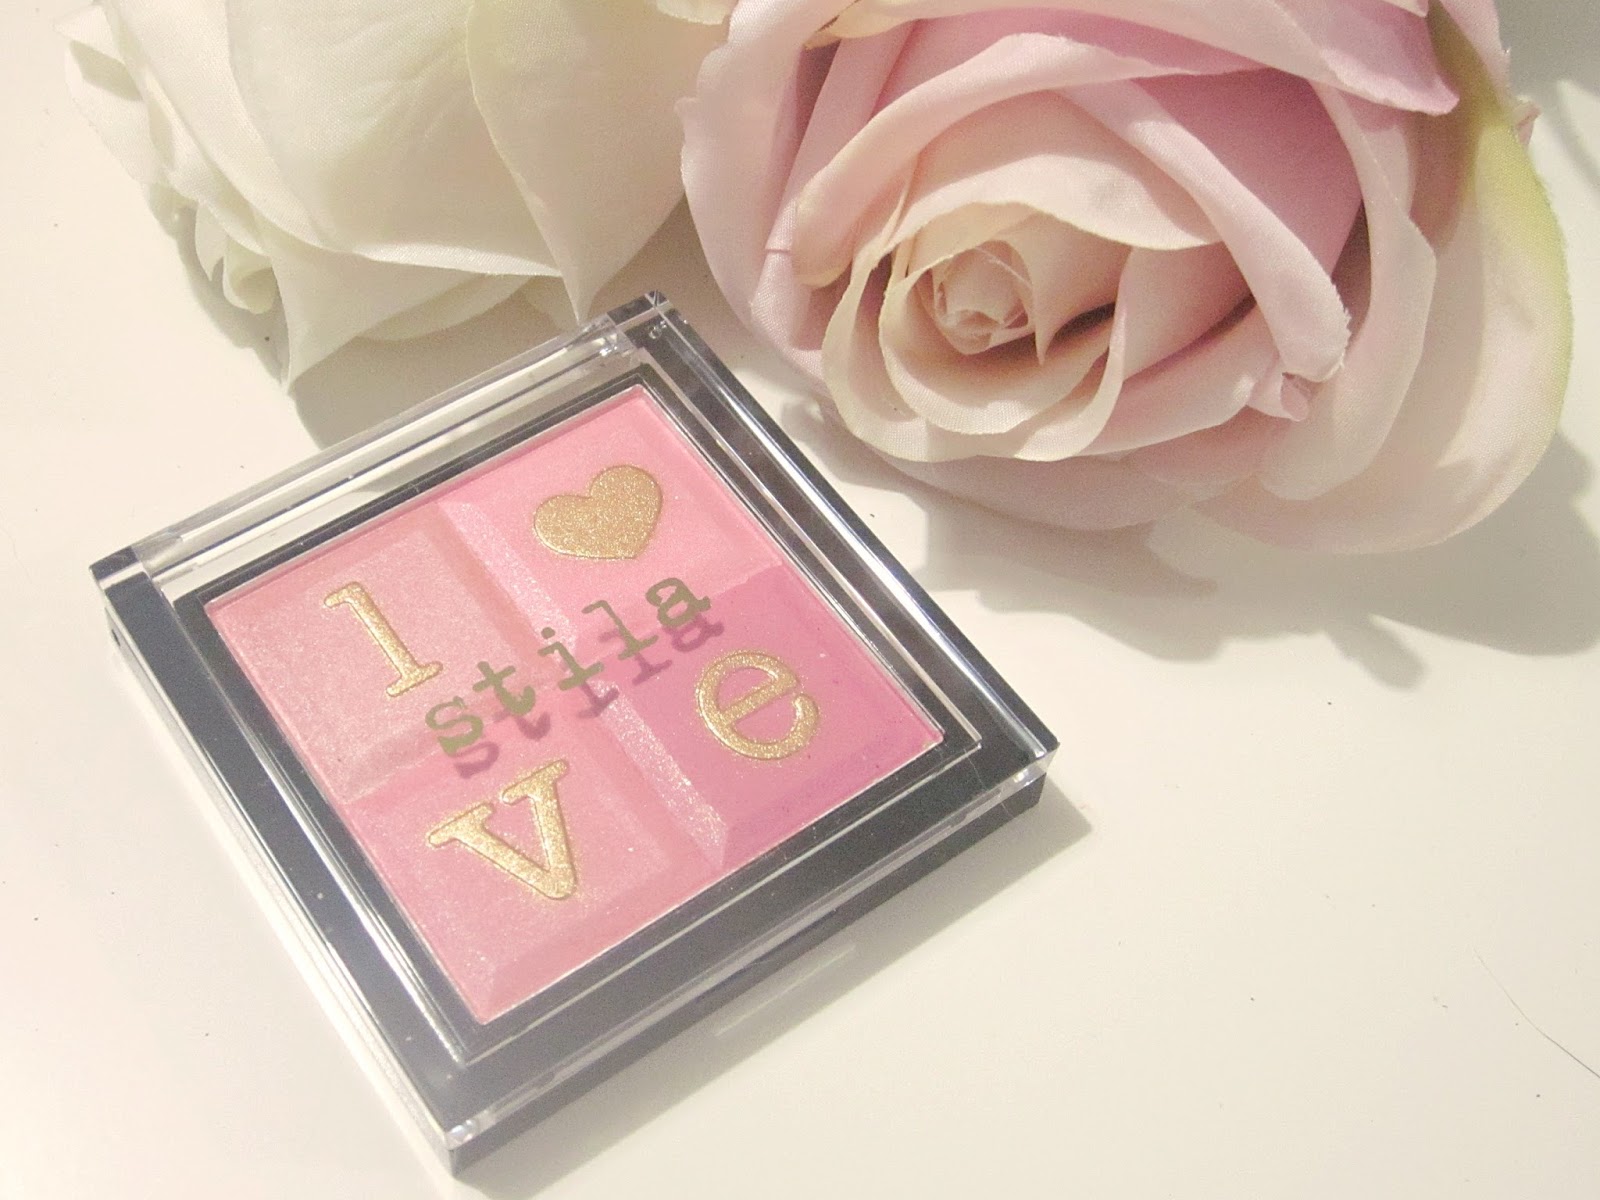 Stila All You Need Is Love Palette 